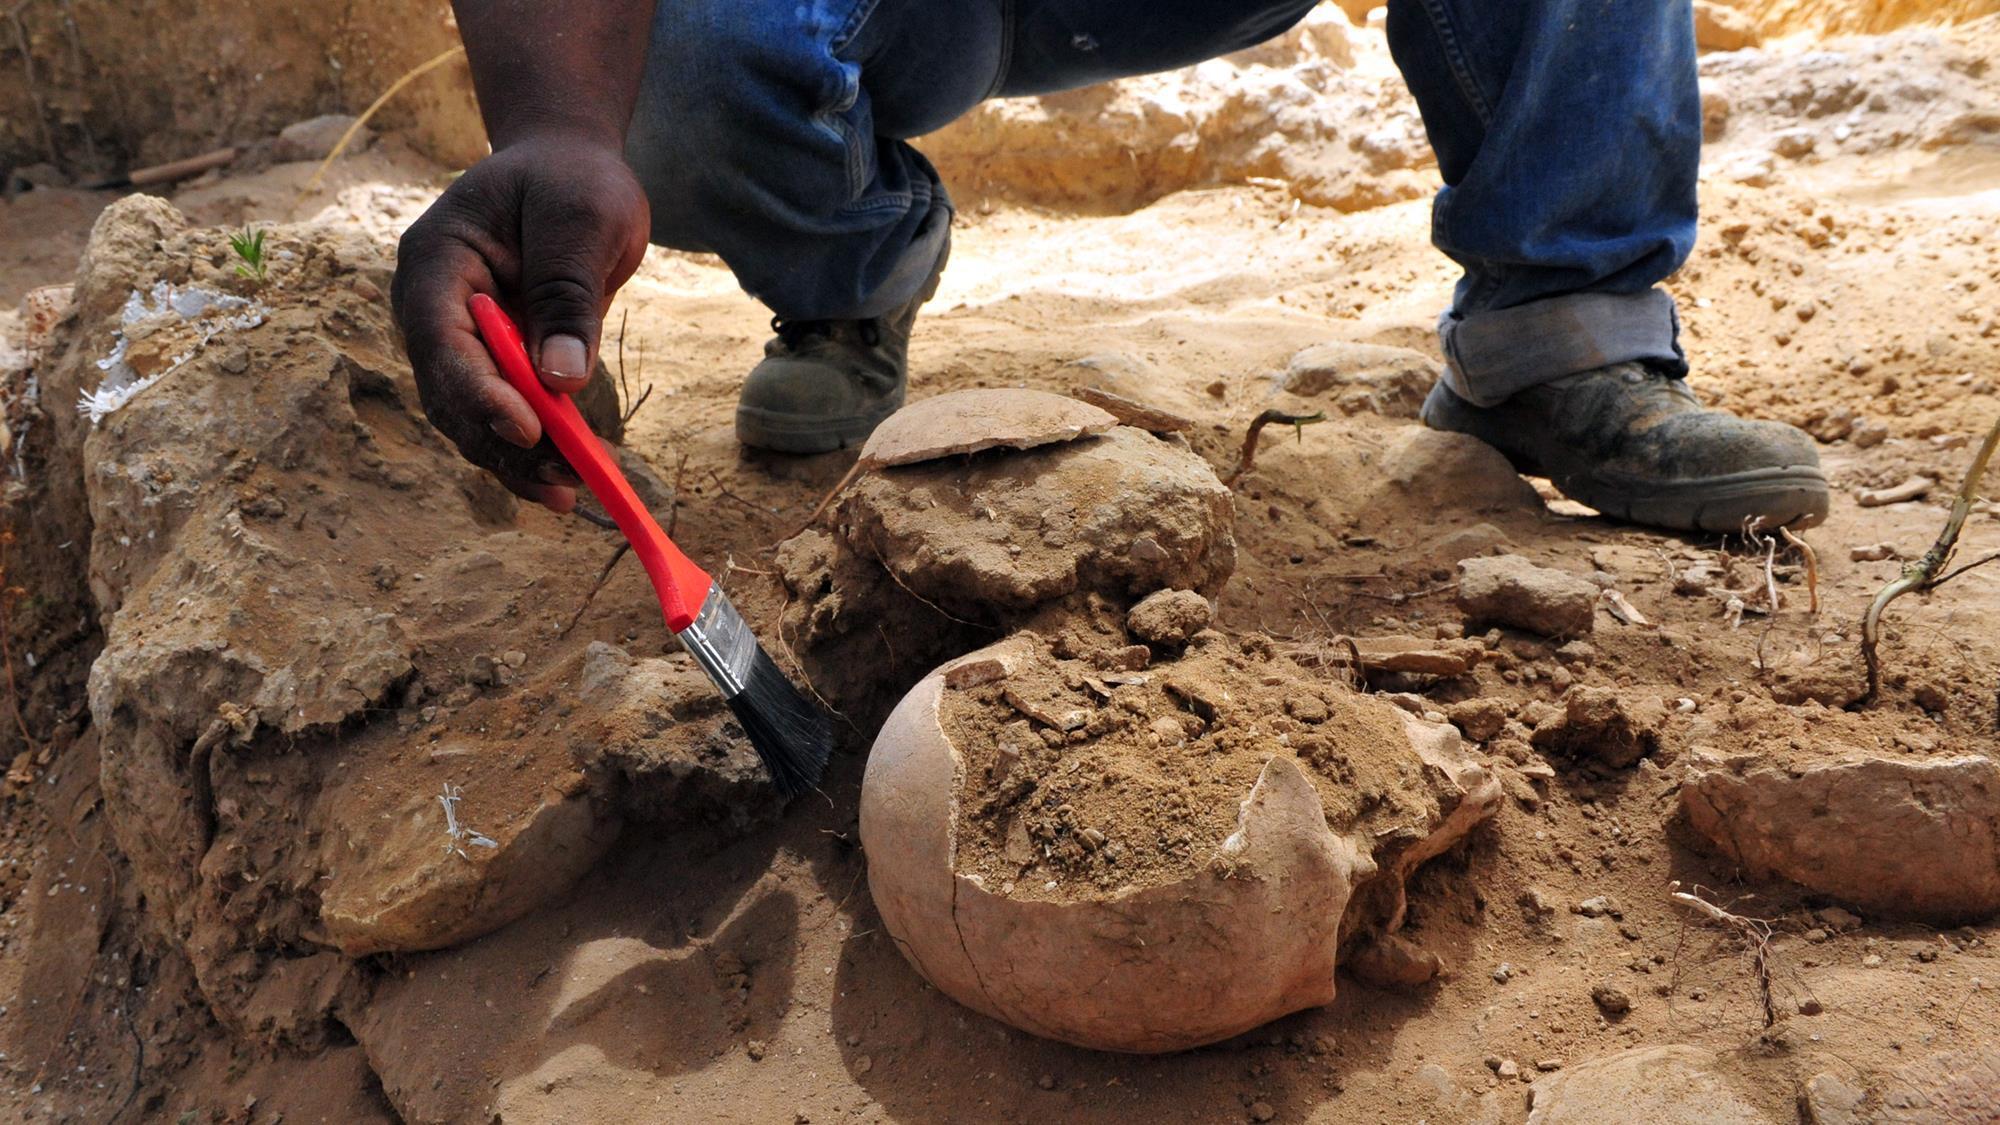 pottery being unearthed at a dig